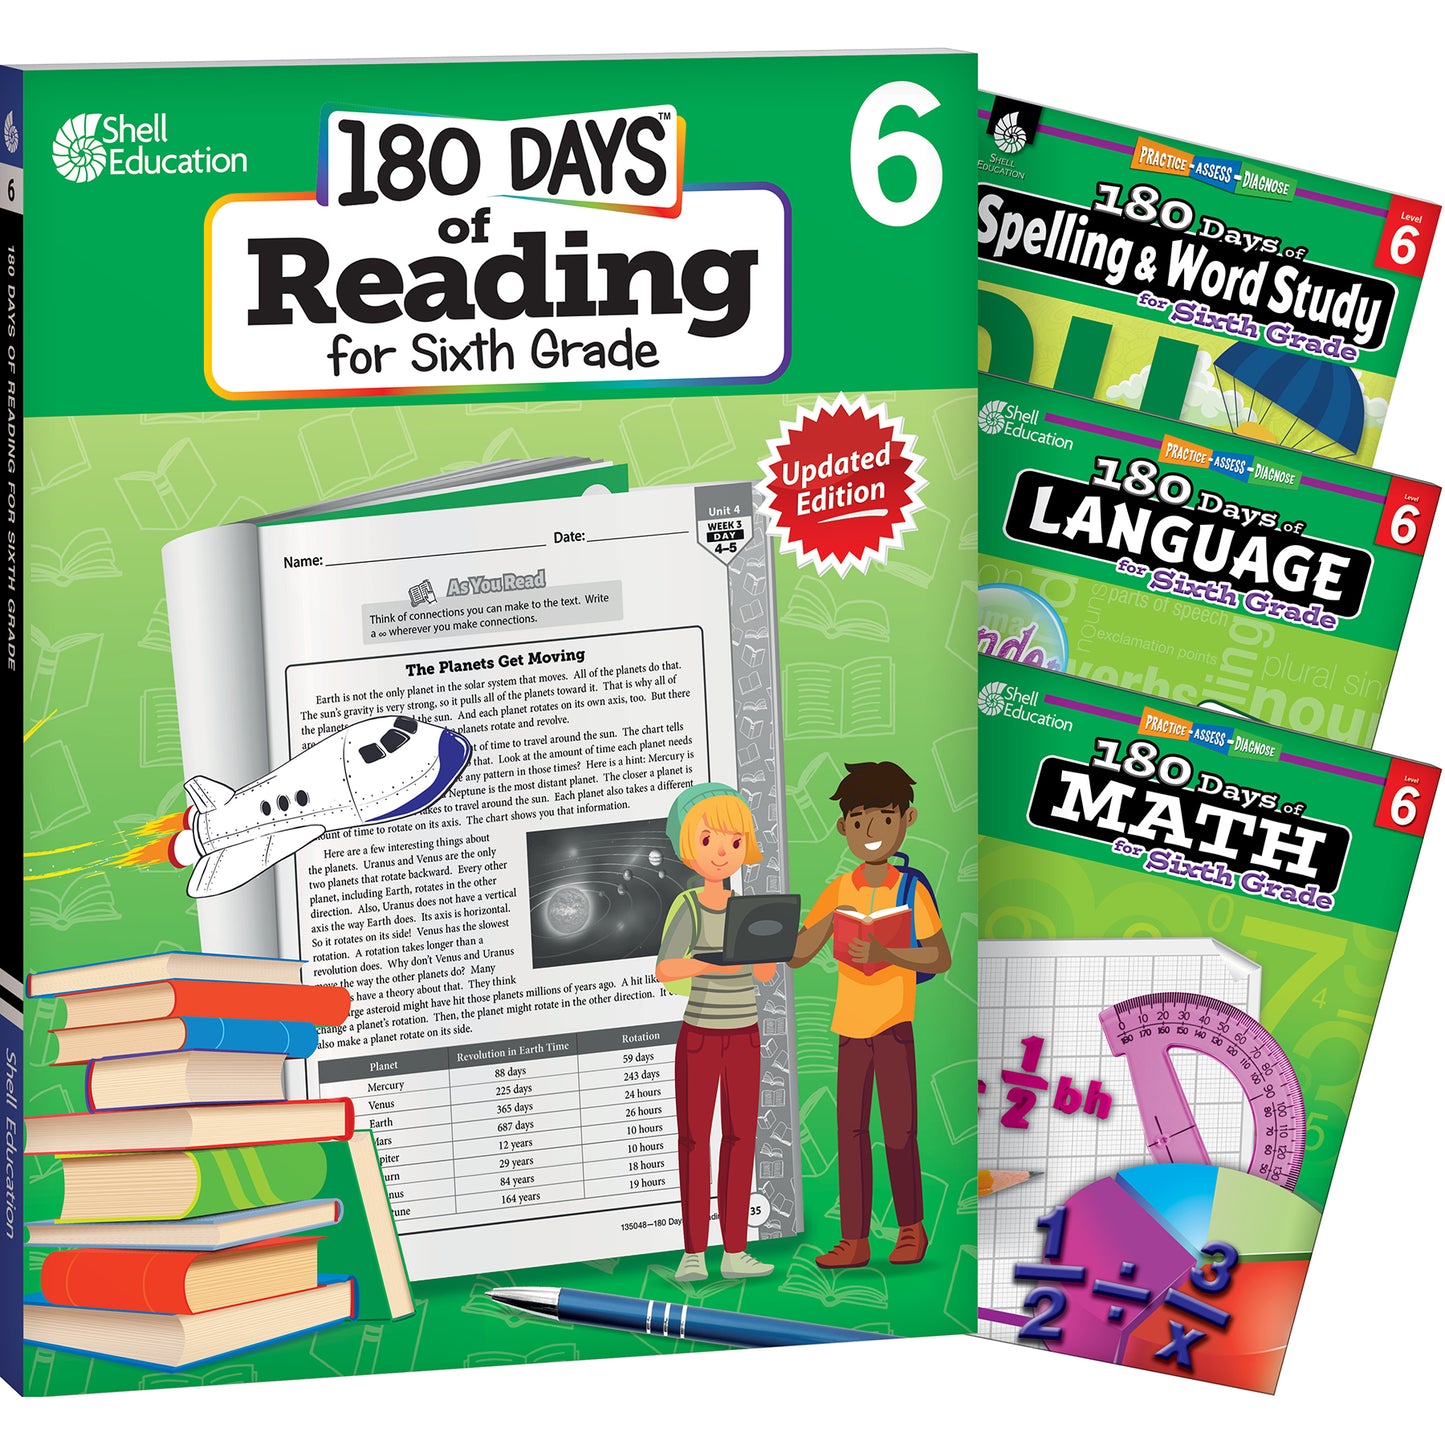 180 Days Books: Reading, Spelling, Language, & Math for Grade 6 - Set of 4 Books